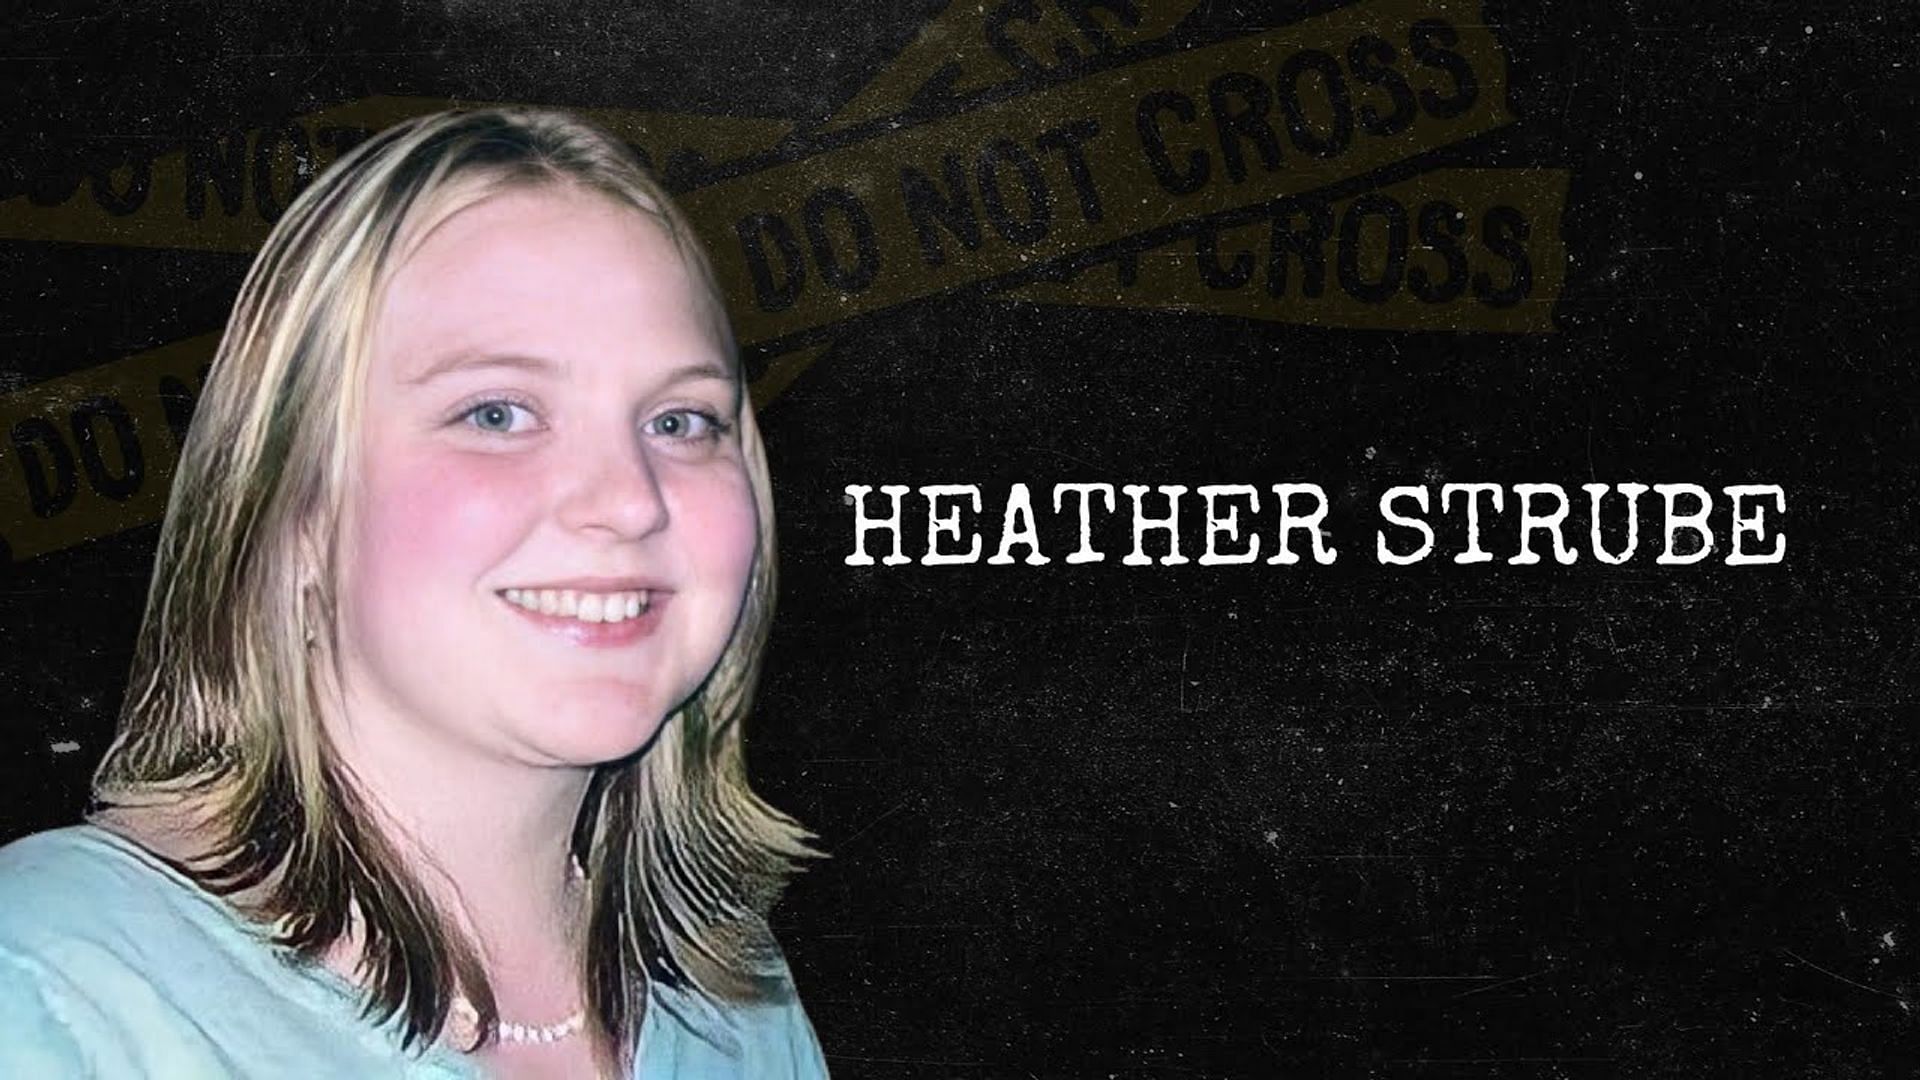 Heather Strube was brutally killed in front of her toddler in 2009 (Image via YouTube)